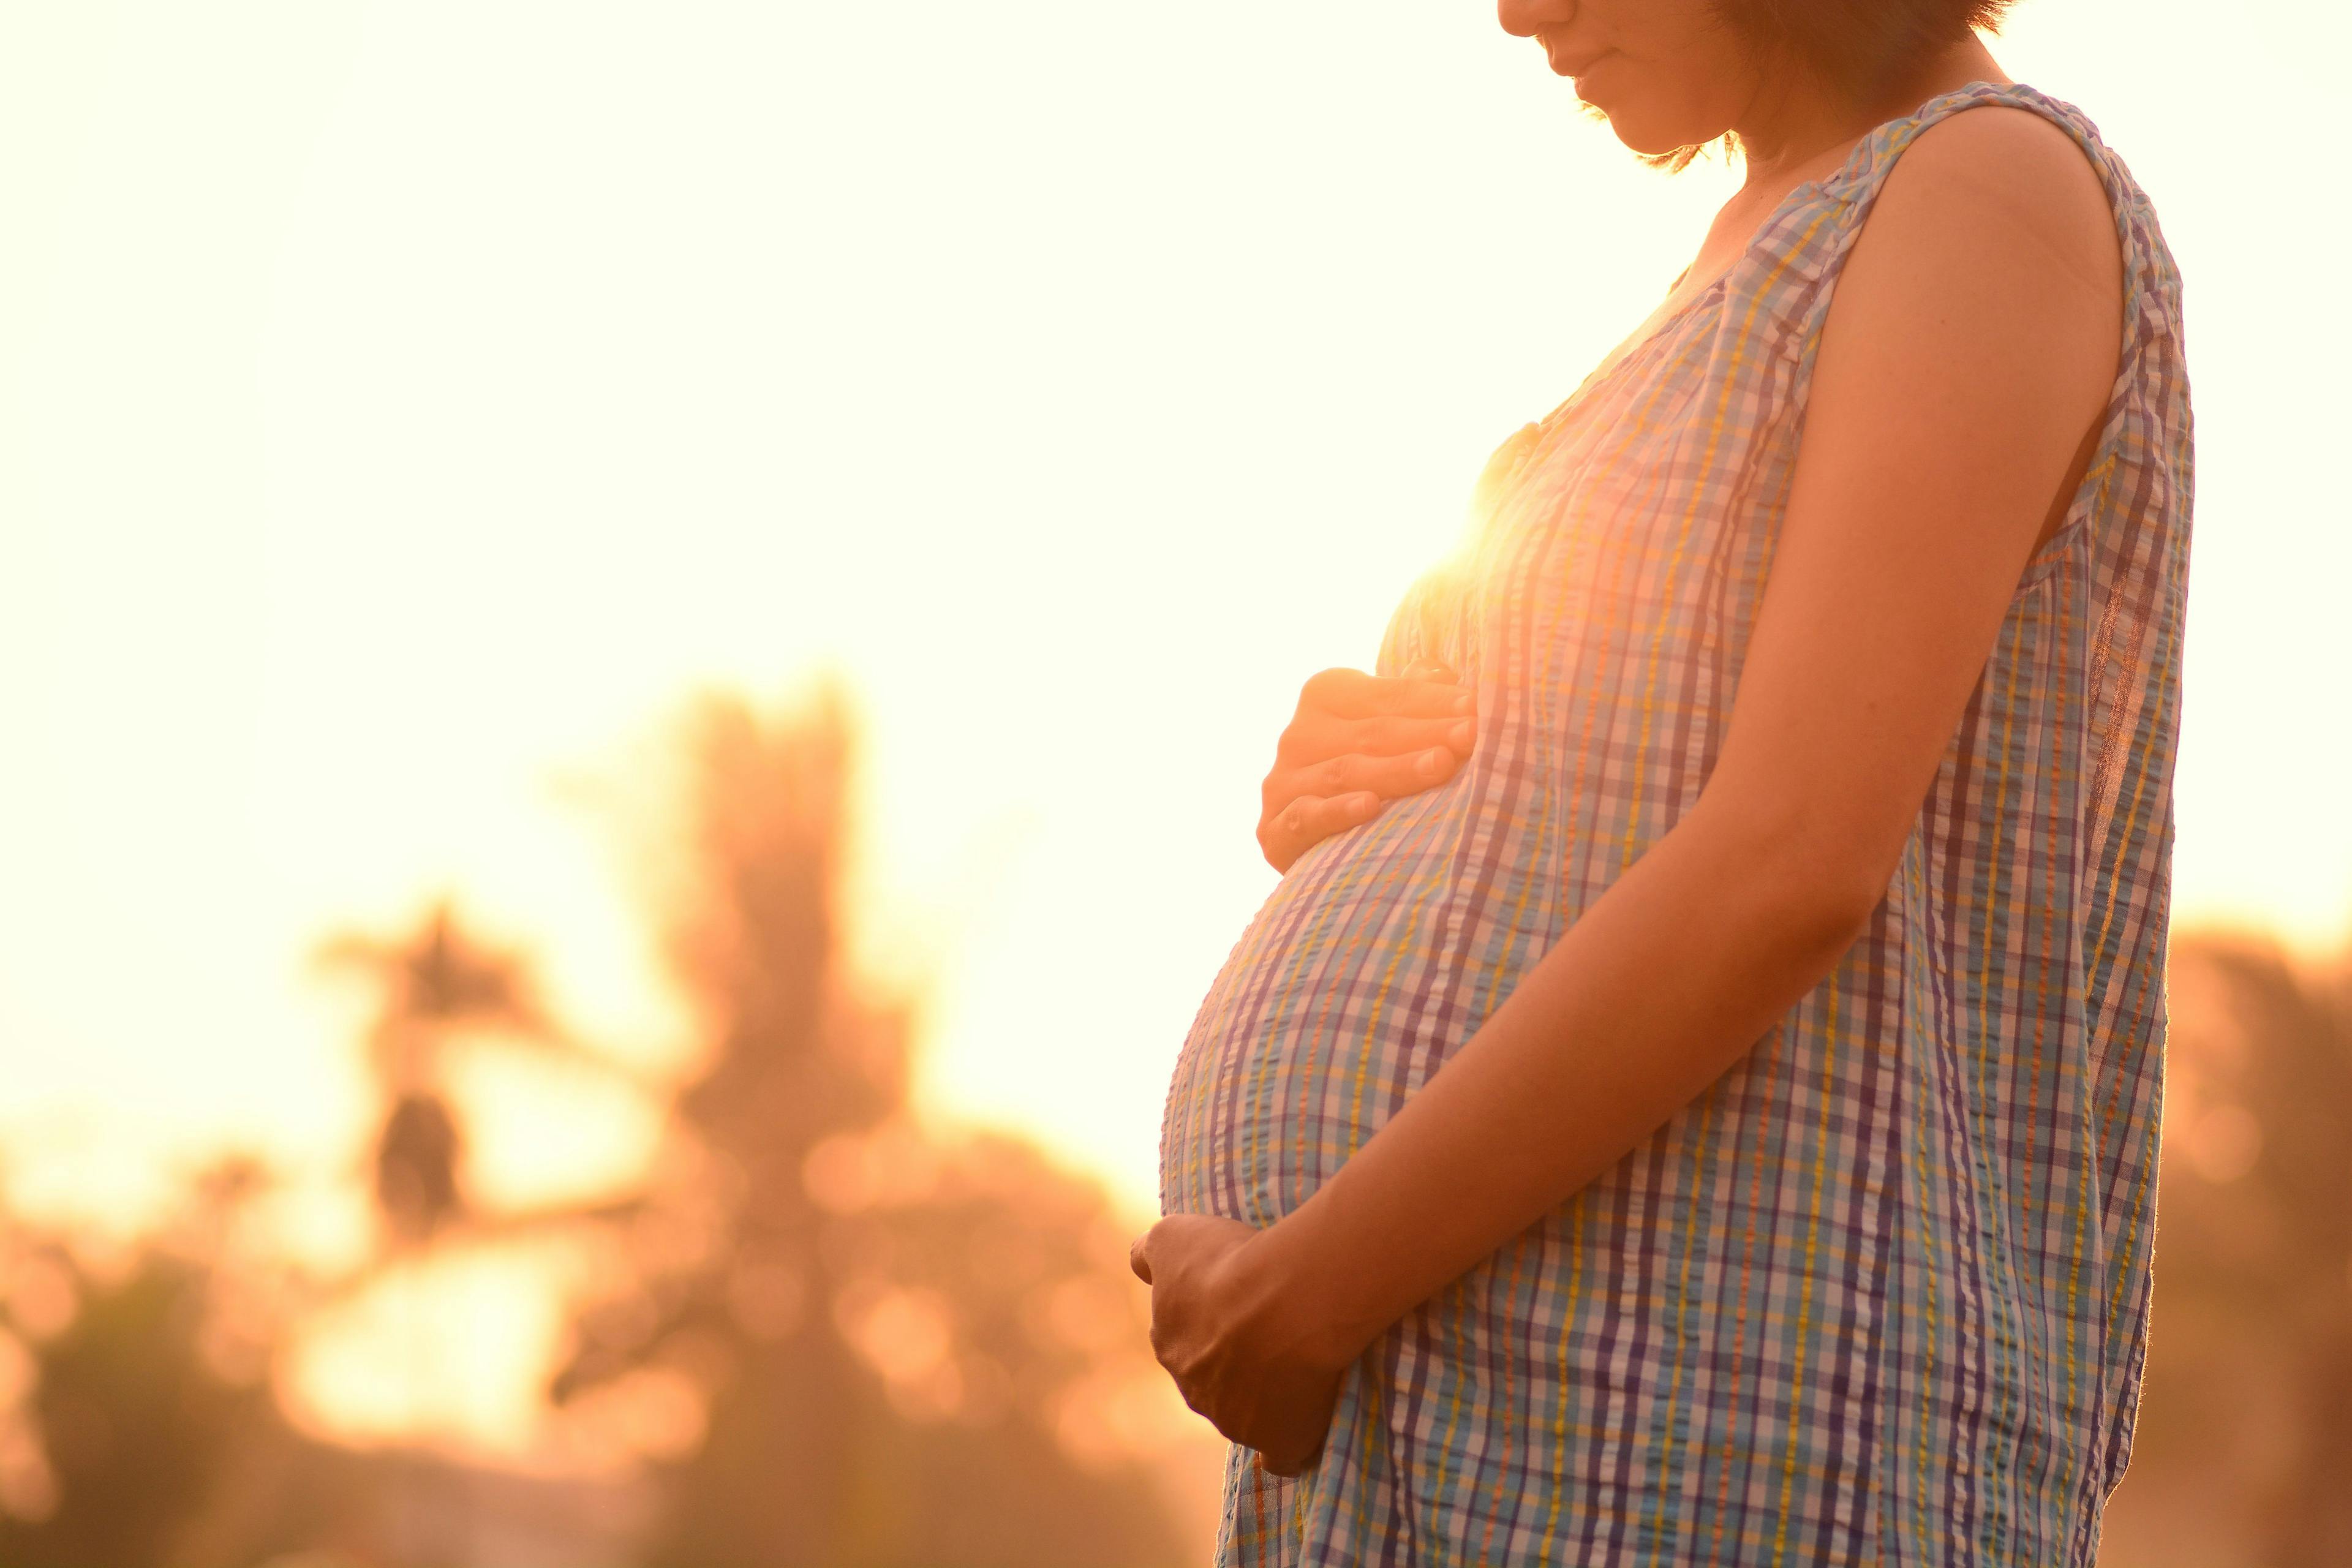 Continued Antidepressant Use Helps Pregnant Women Manage Severe Mental Illness